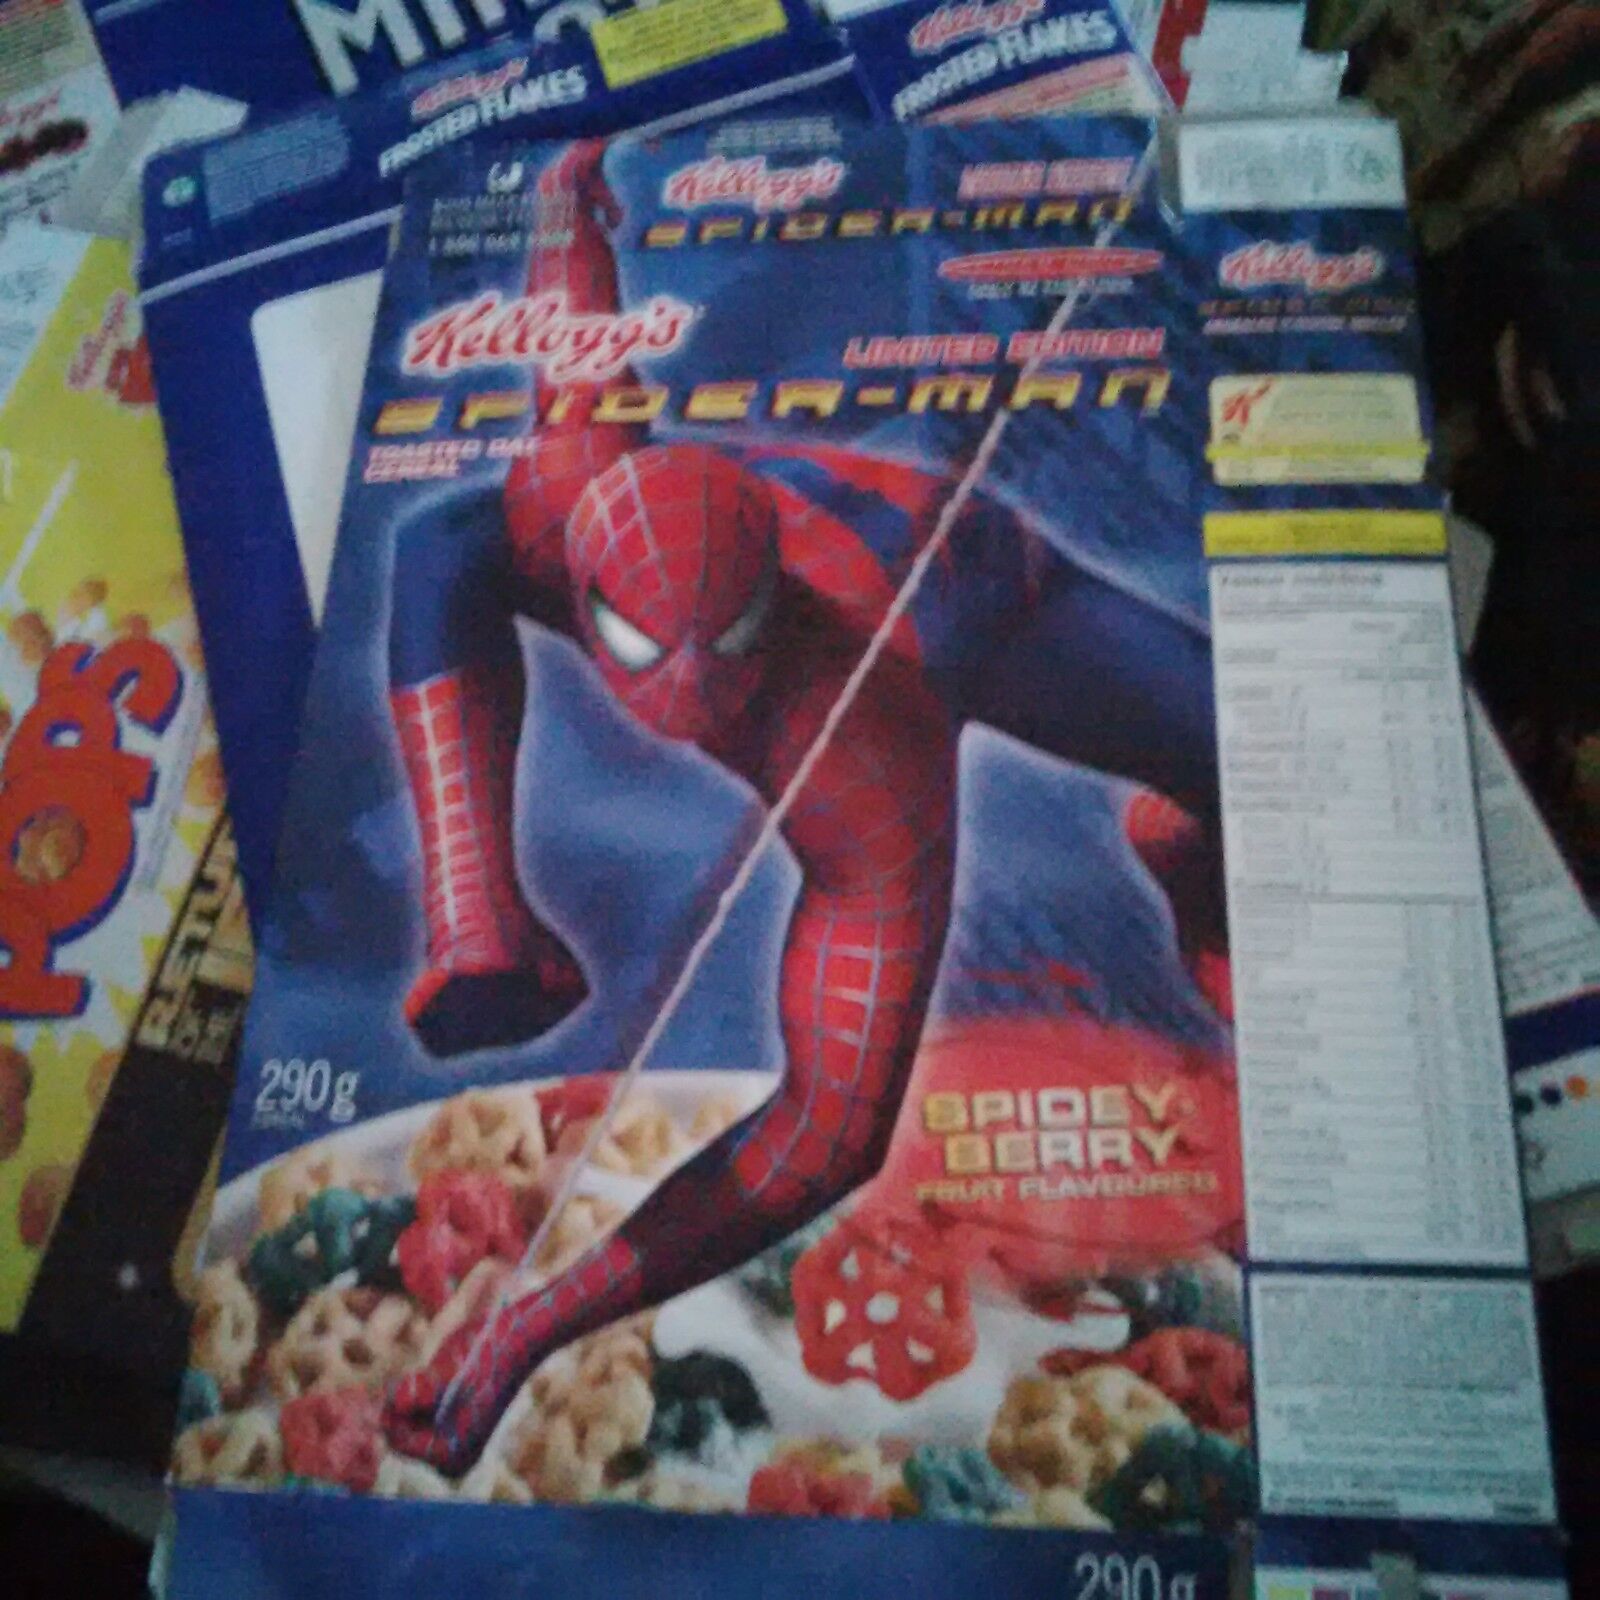 2004 MEGA RARE SPIDERMAN 2 HONEYCOMB SPIDEY BERRY CEREAL BOX LIMITED EDITION CND